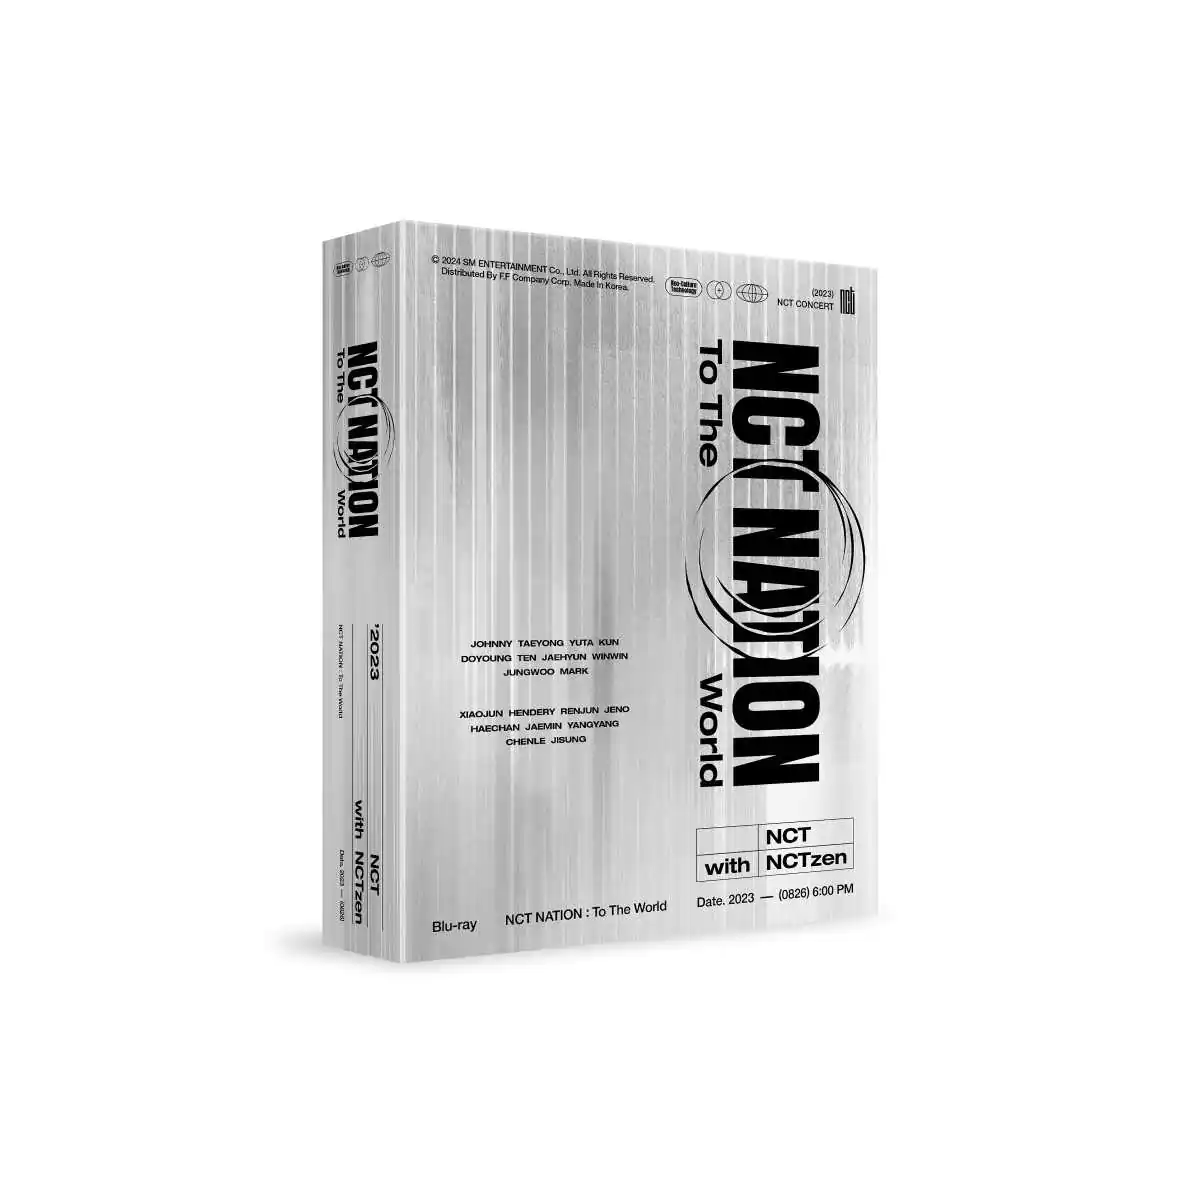 NCT - 2023 CONCERT - NCT NATION: To The World in INCHEON Blu-ray 